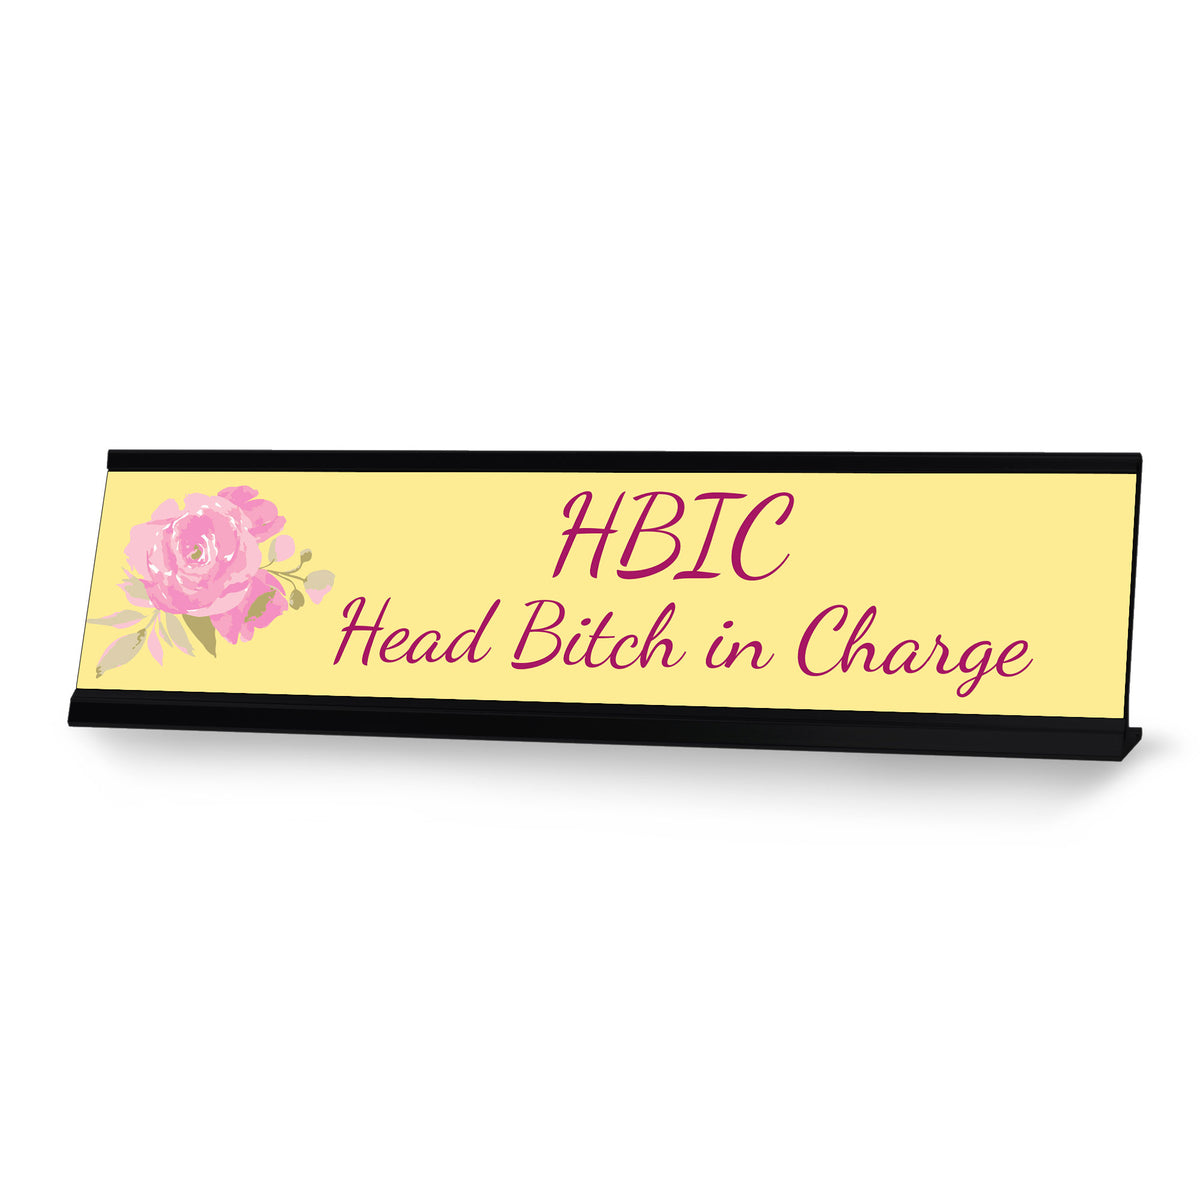 HBIC Head Bitch in Charge, Floral Italics Desk Sign (2 x 8")